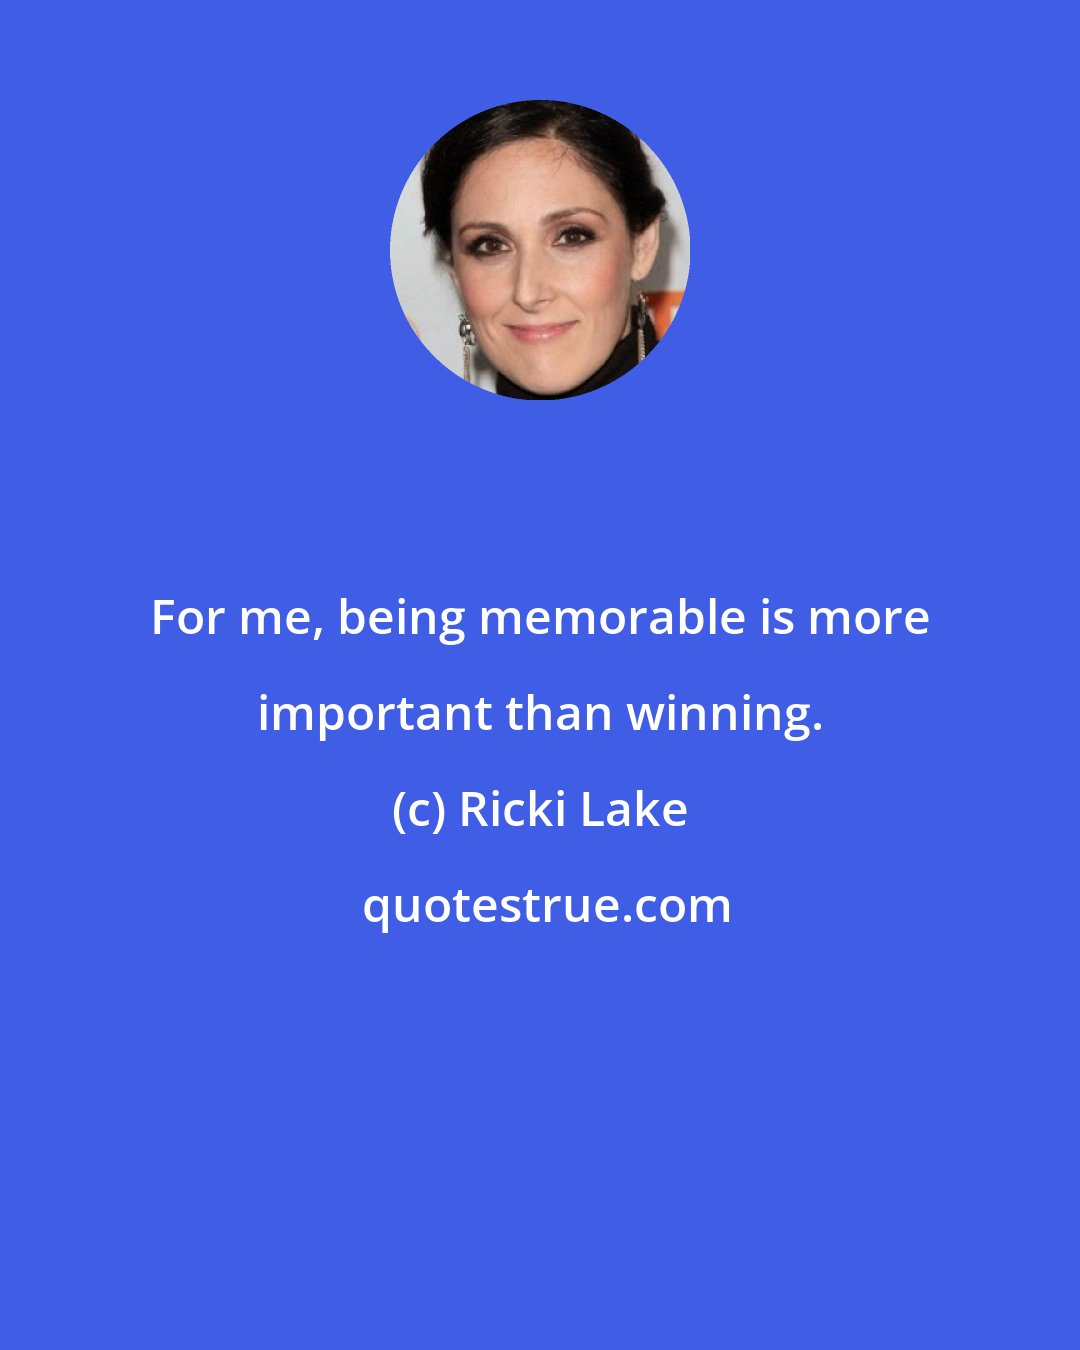 Ricki Lake: For me, being memorable is more important than winning.